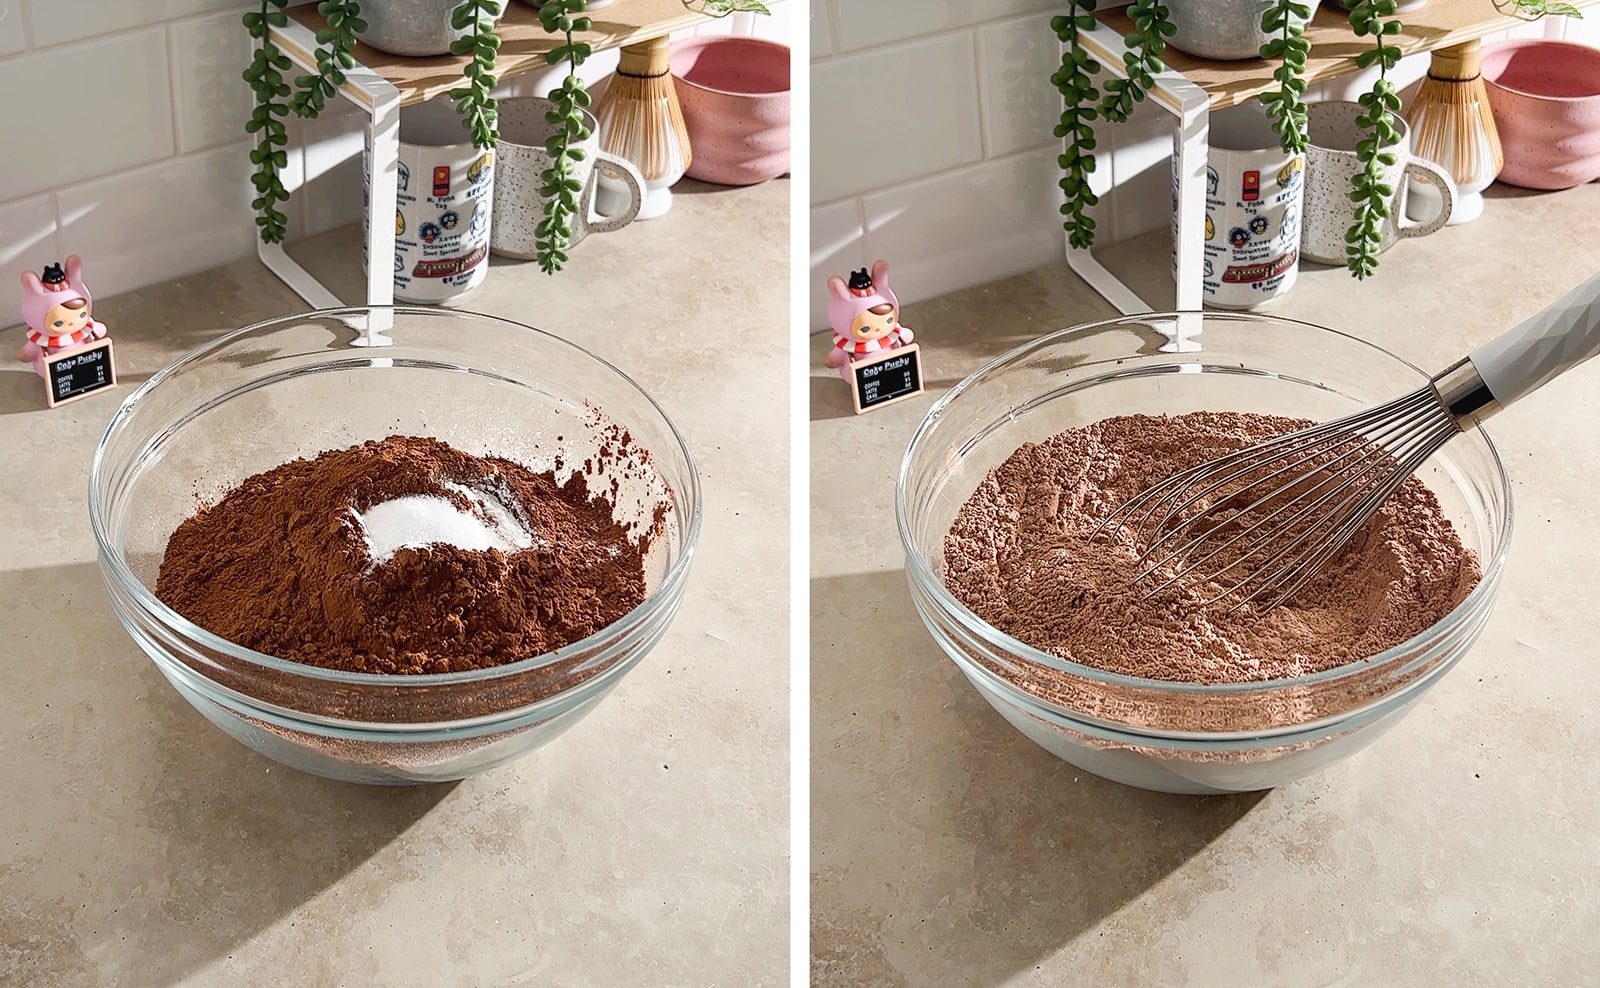 Left to right: cocoa powder and dry ingredients in a mixing bowl, whisk in a bowl of dry ingredients.